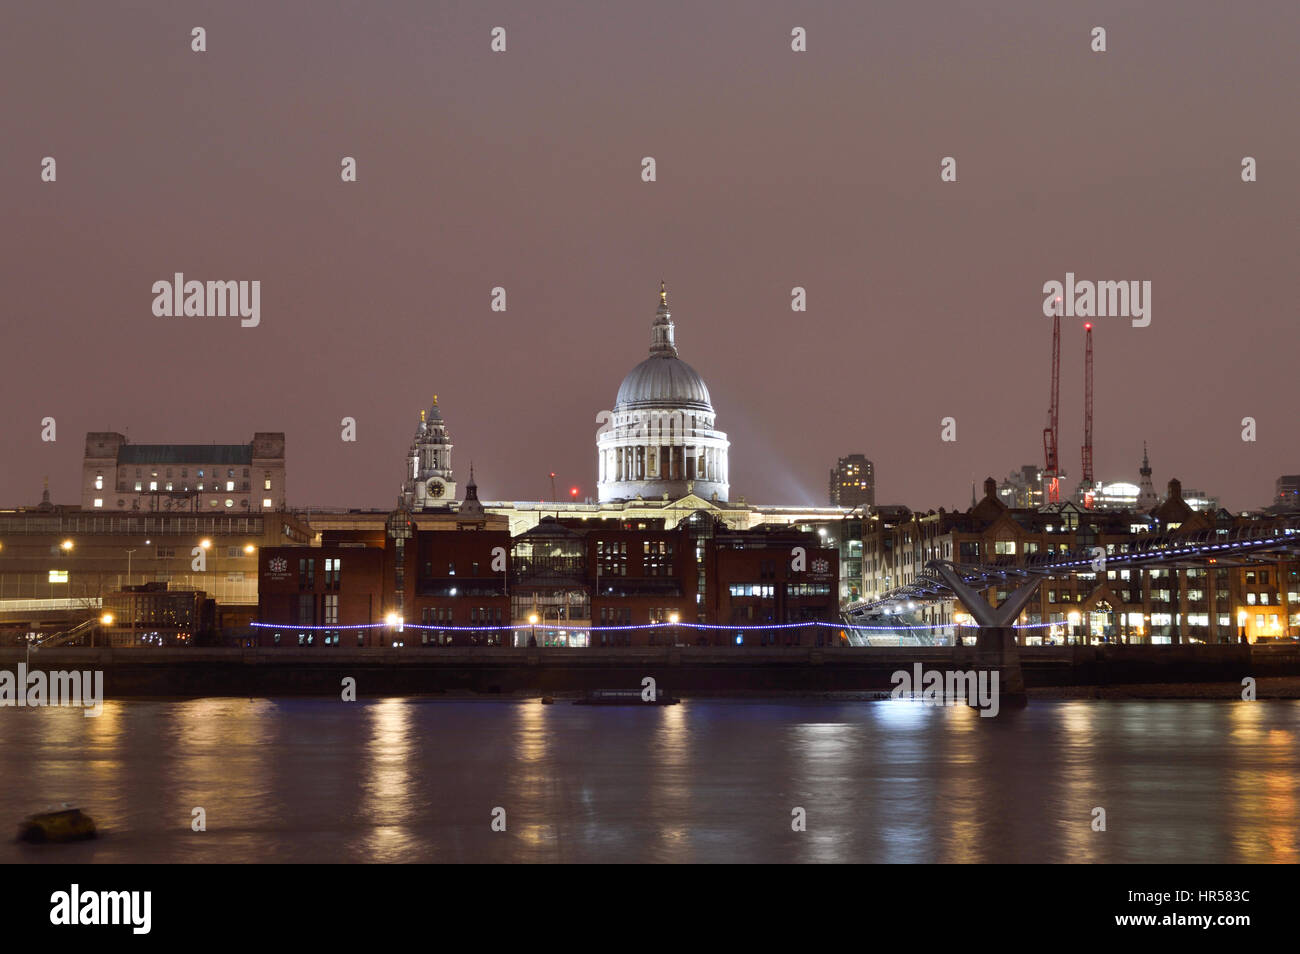 View over the Thames river to St Paul's cathedral at night, London, cityscape, UK Stock Photo